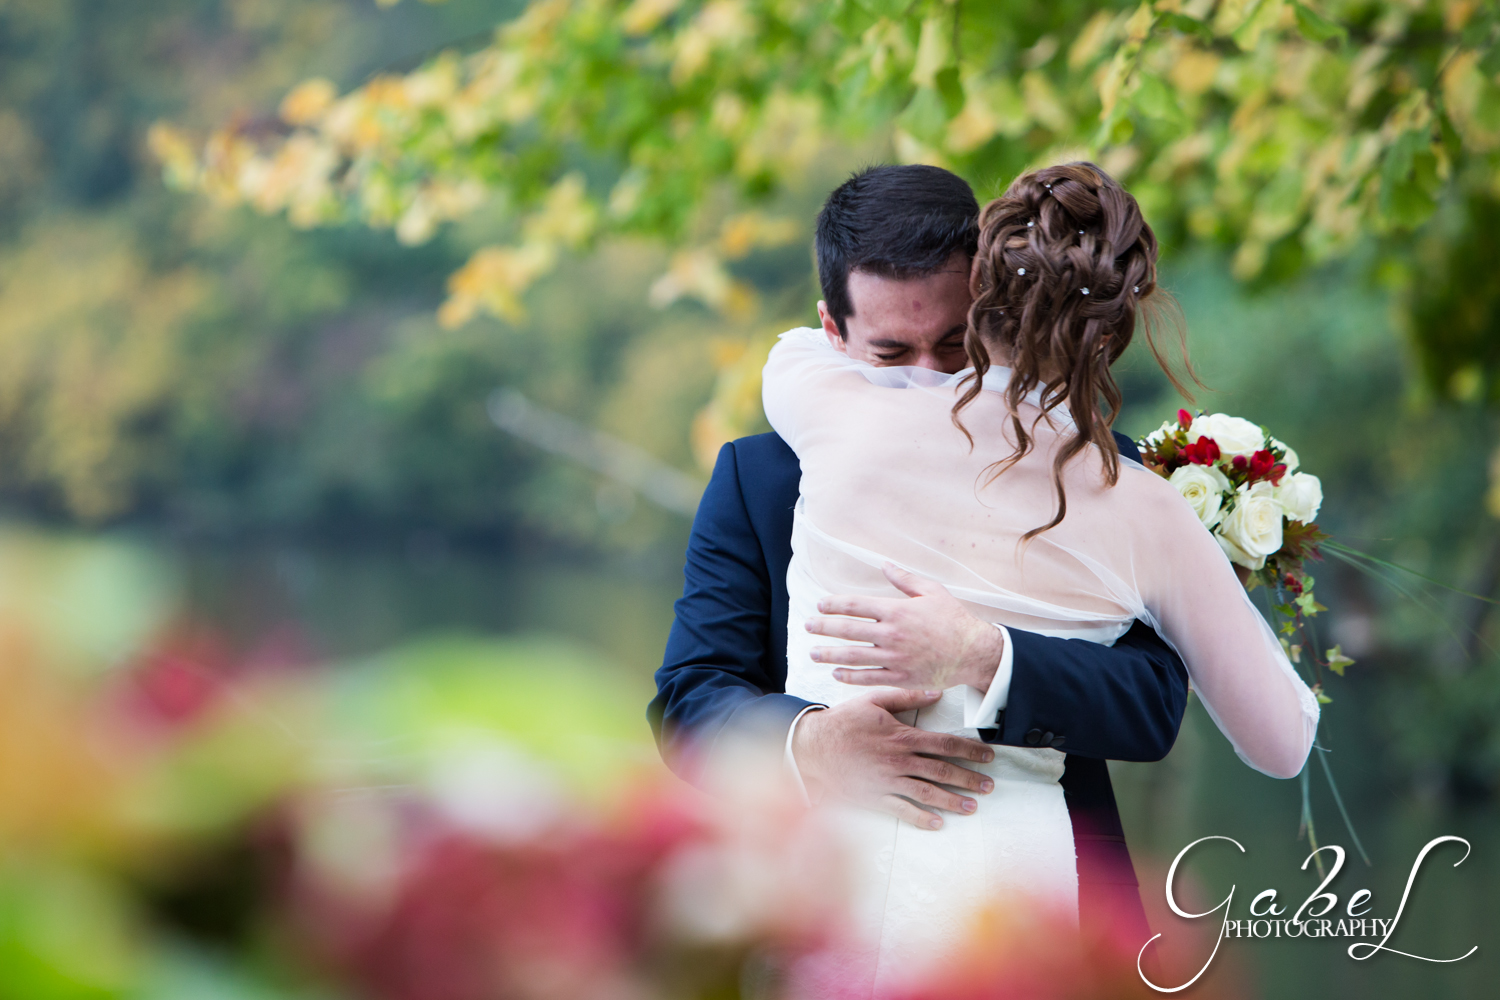 Mariage, Wedding, Automne, Love, Oui, Amour, Grand Jour, Wedding Day, Shooting, Séance, Photos, Gabel Photography